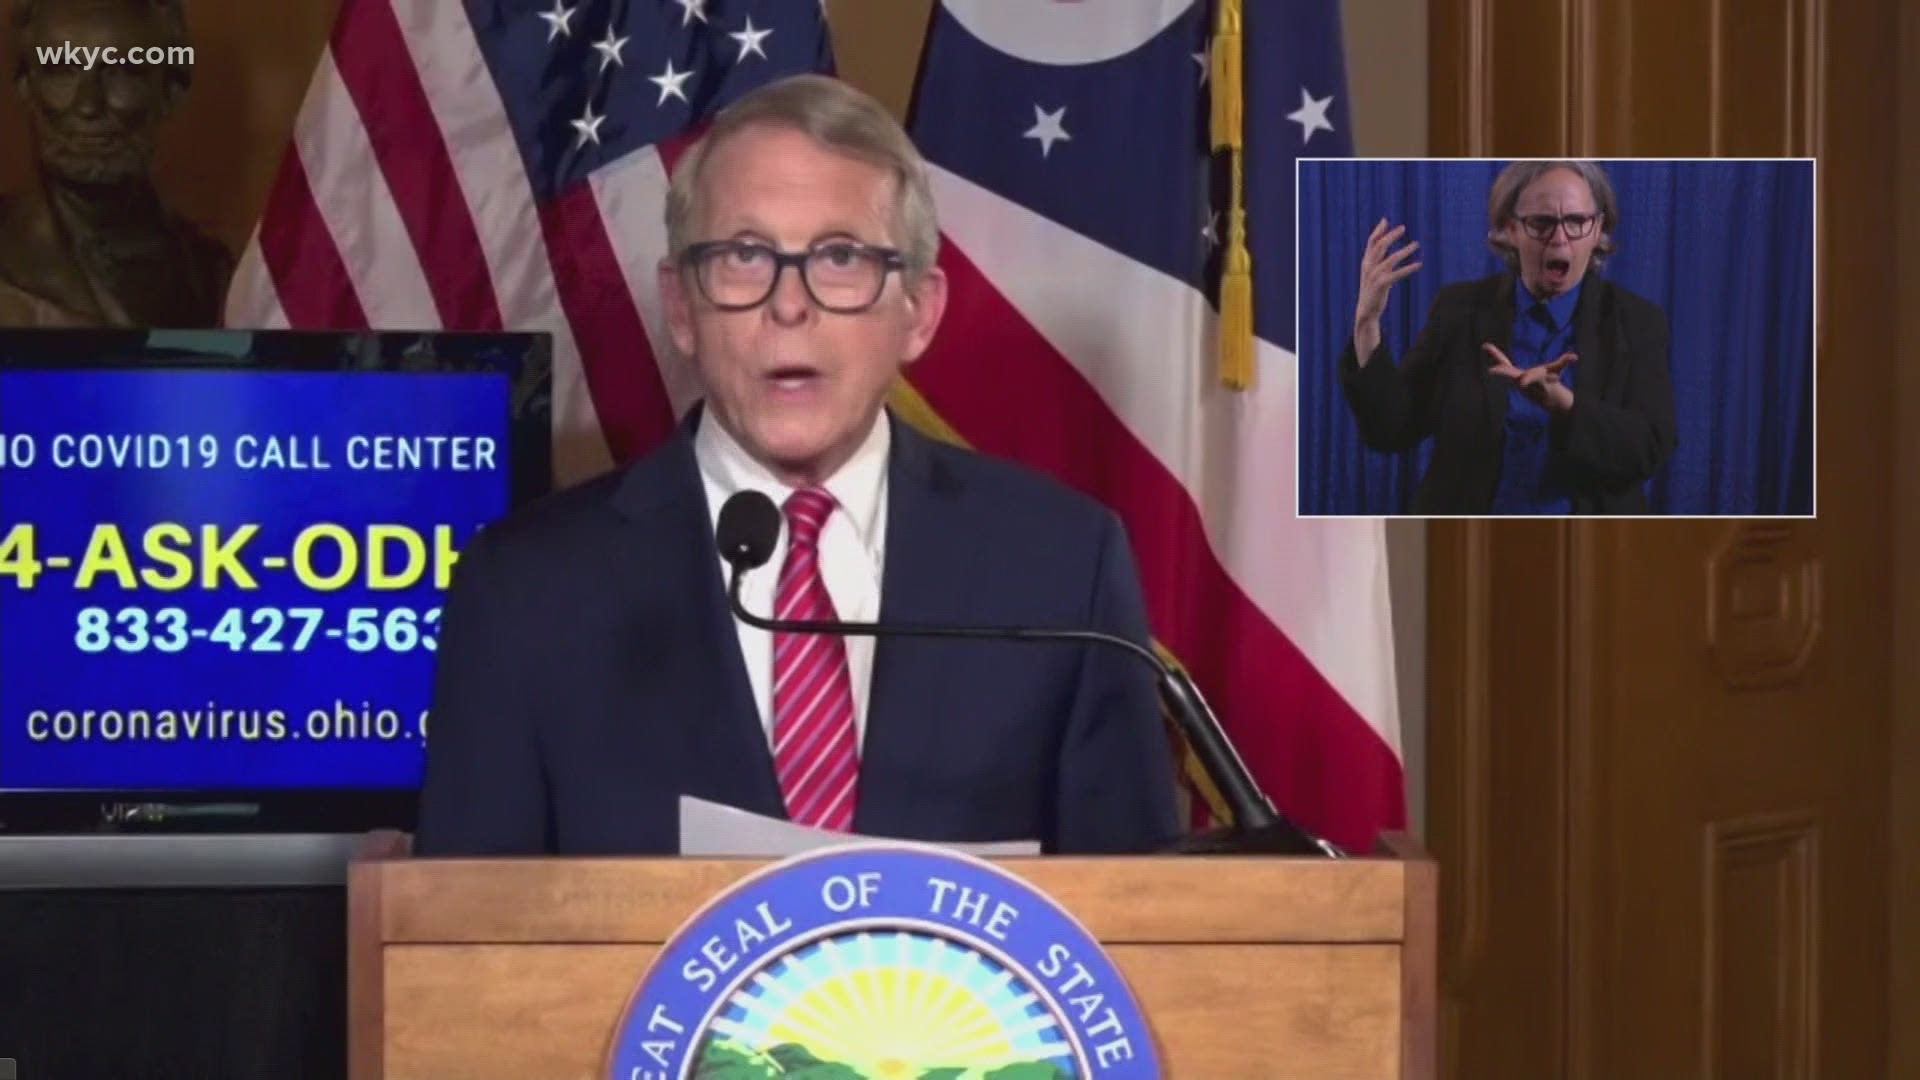 According to Ohio Governor Mike DeWine, 2.76 million people have signed up for the state's $1 million Vax-A-Million lottery.